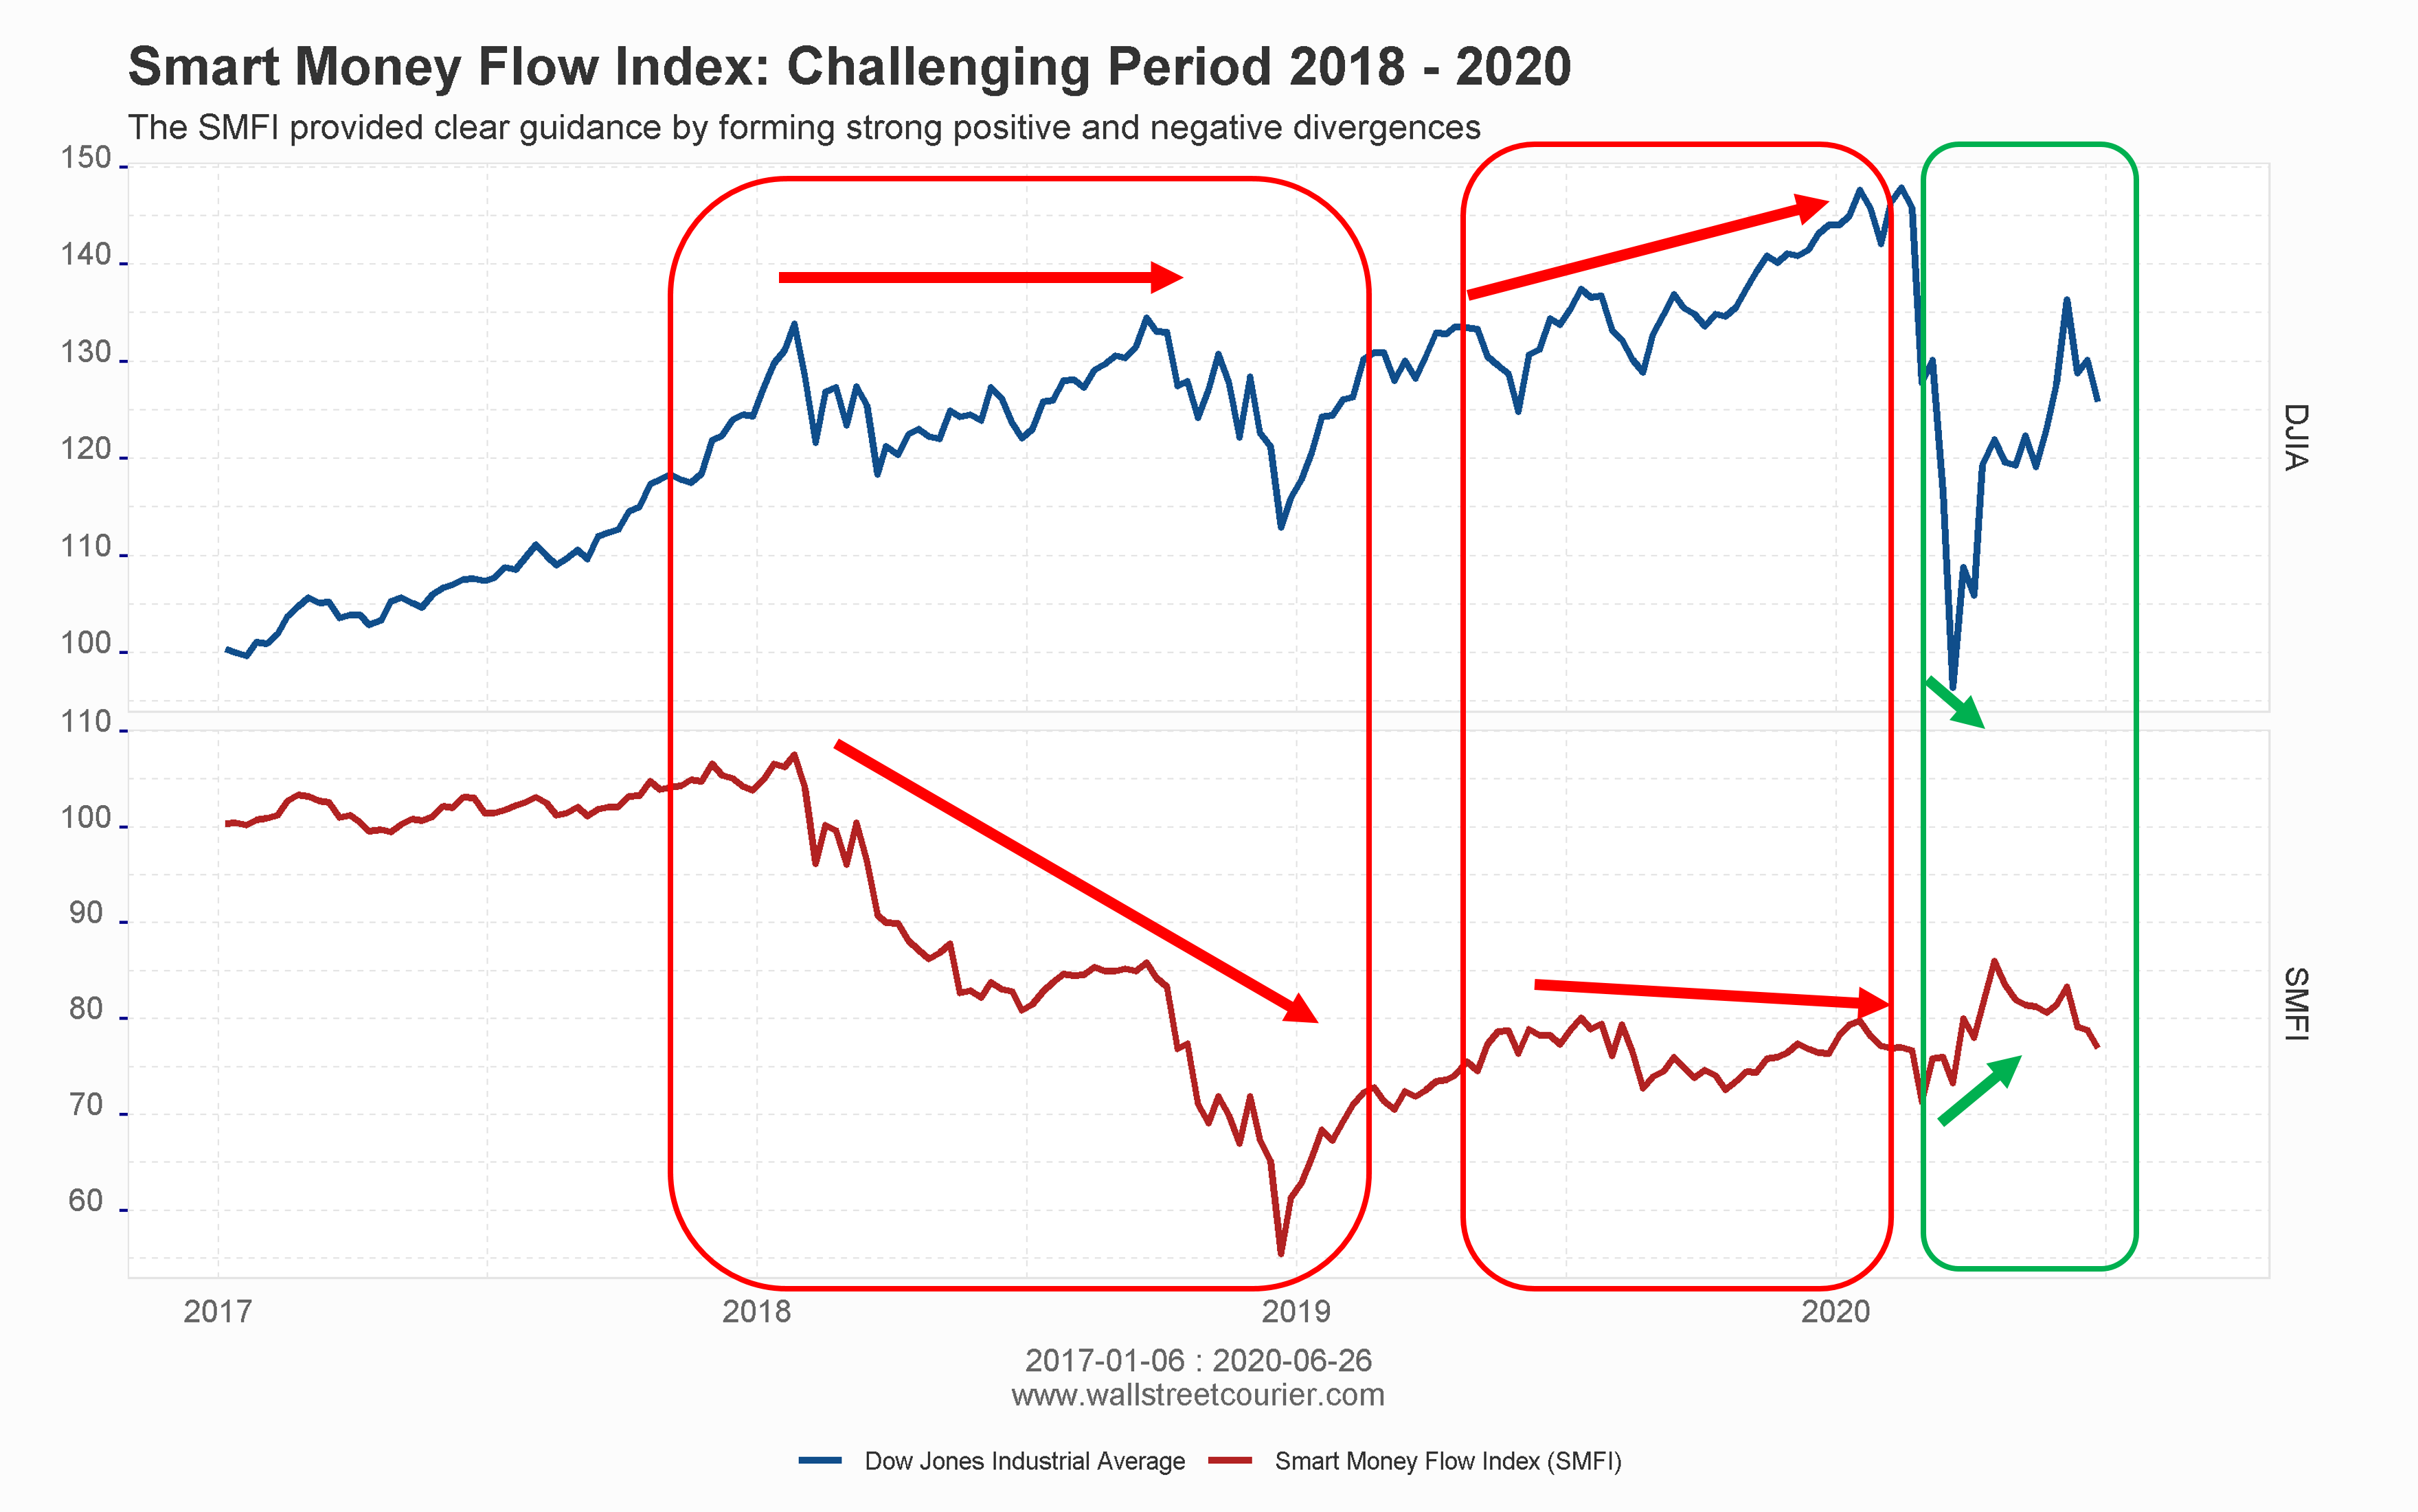 Chart showing the Smart Money Flow Index's performance during the growth concerns in 2018, highlighting the index's ability to send out warning signals before market corrections